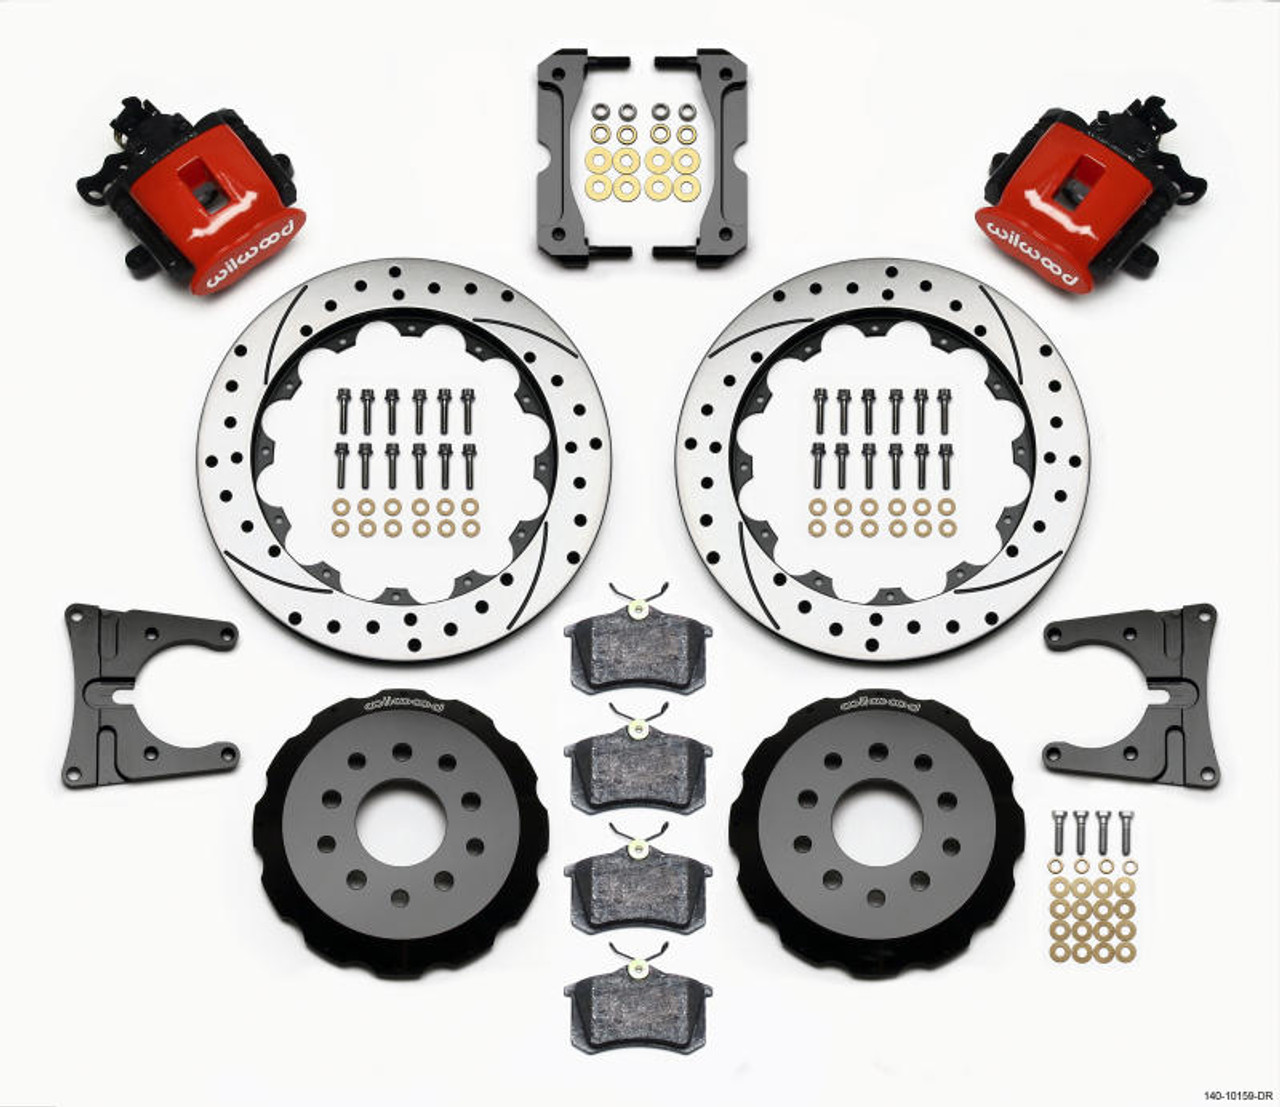 WilWood Wilwood Combination Parking Brake Rear Kit 12.88in Drilled Red 2005-2014 Mustang - 140-10159-DR